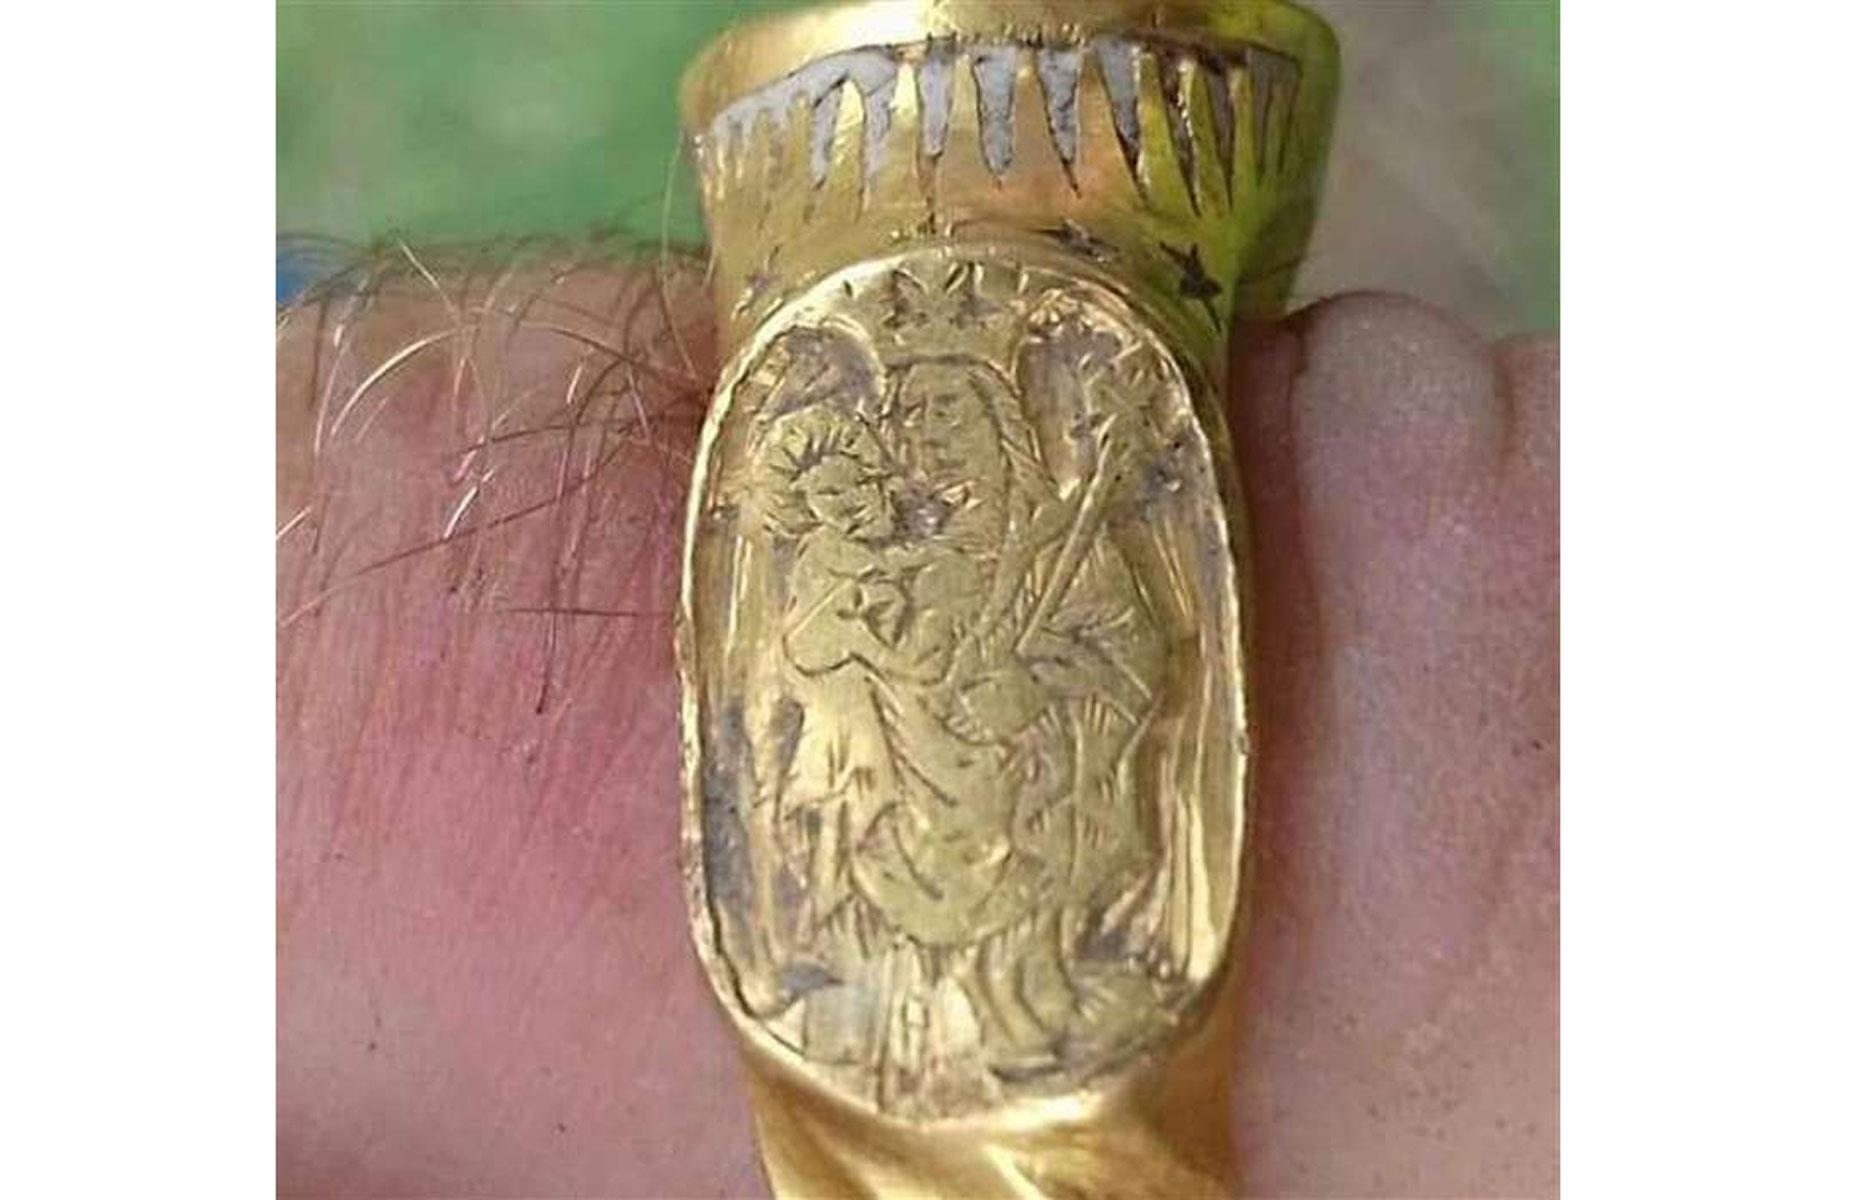 The 16th century gold bishop's ring